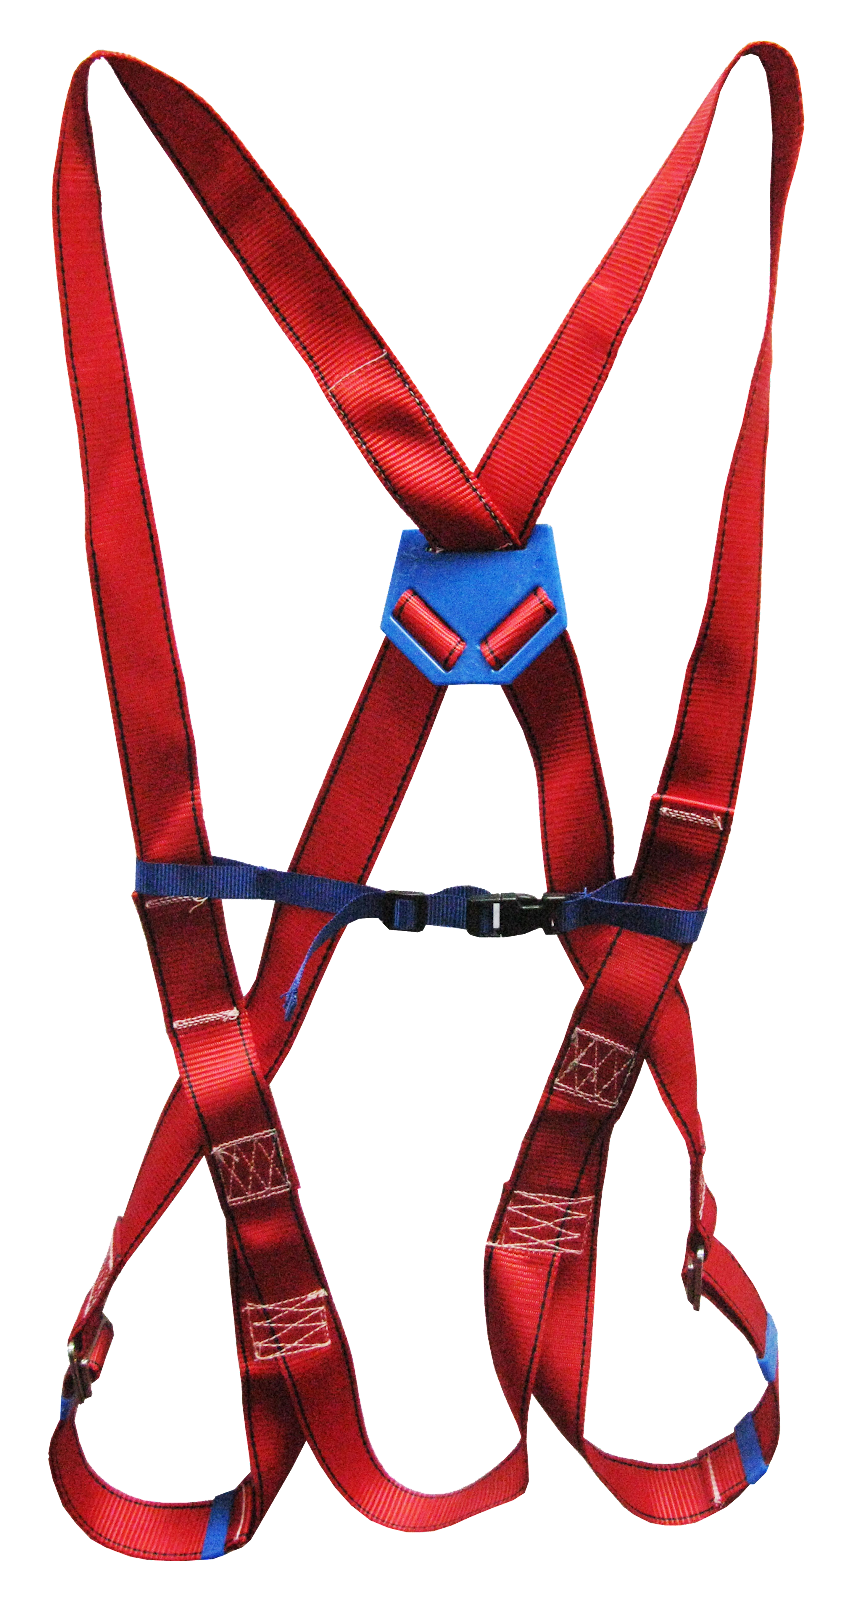 Plus Full Body Harness - Full Body Safety Harness Features: